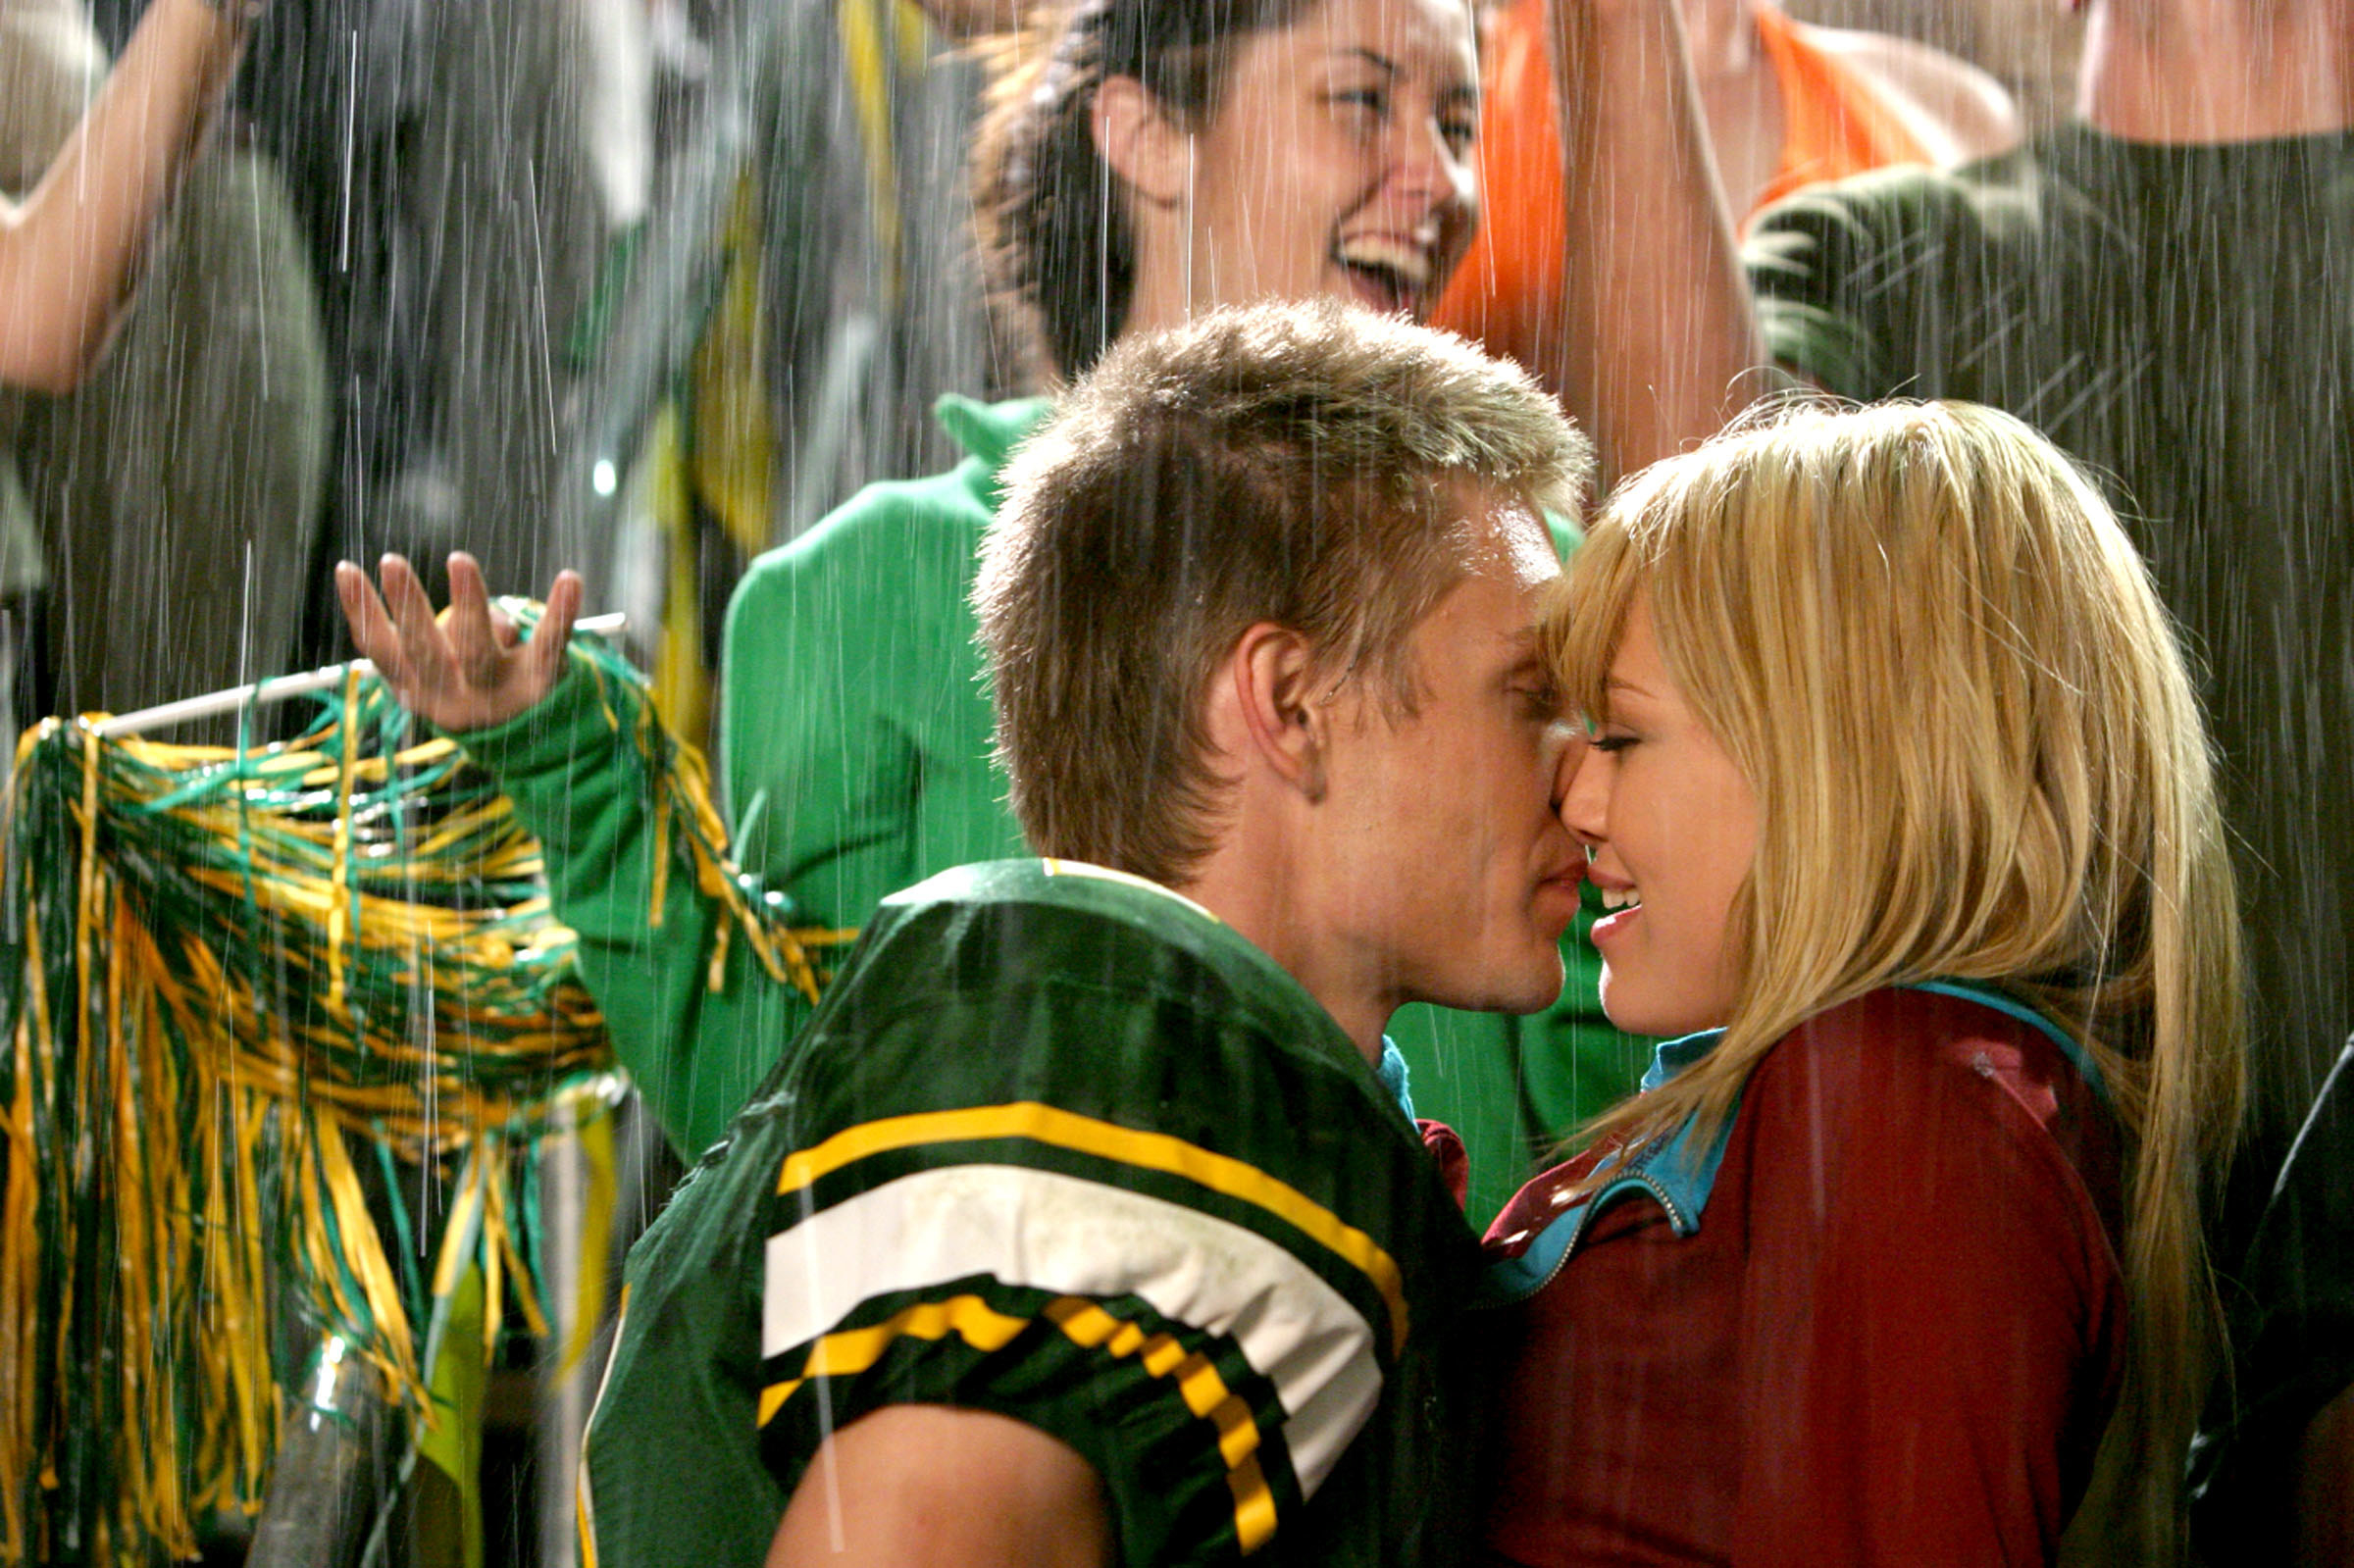 Chad Michael Murray and Hilary Duff kiss on the football field during the rain